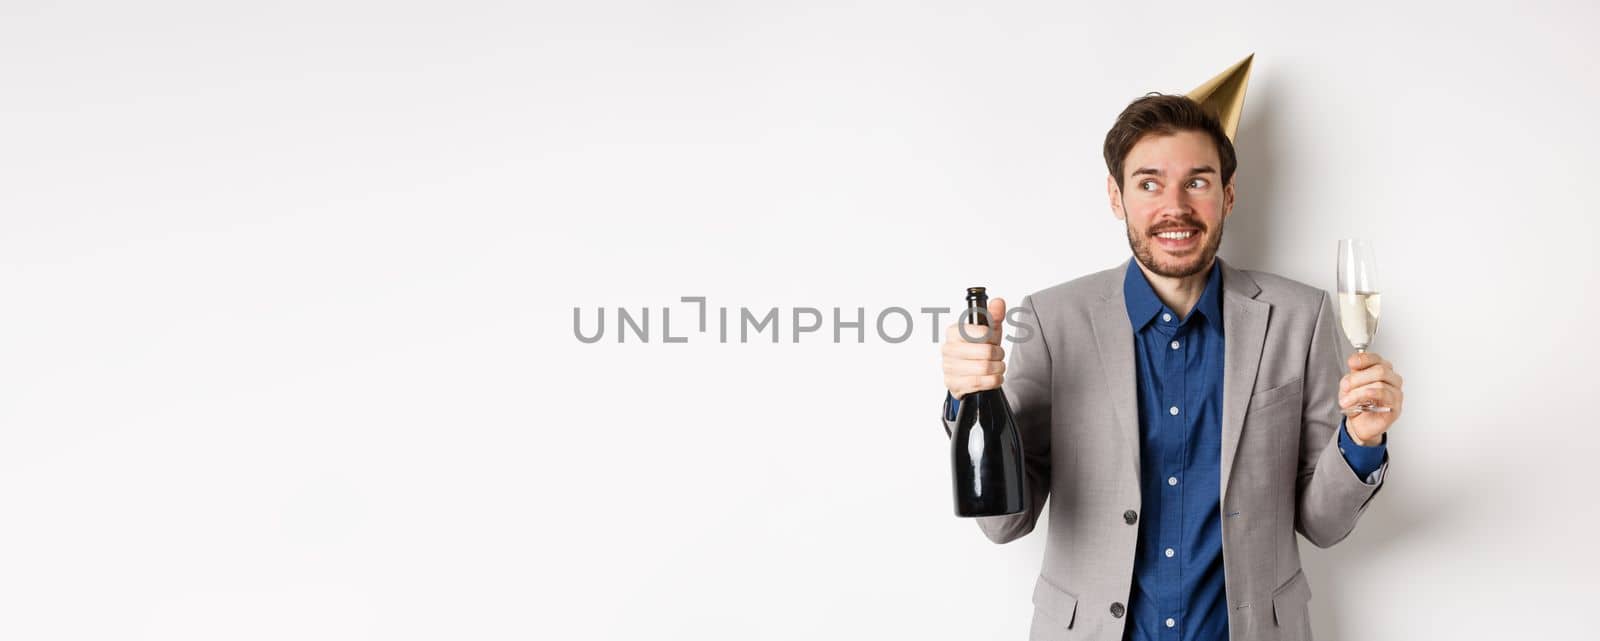 Celebration and holidays concept. Happy birthday guy in suit and party hat drinking champagne, holding bottle and glass, smiling and looking aside.